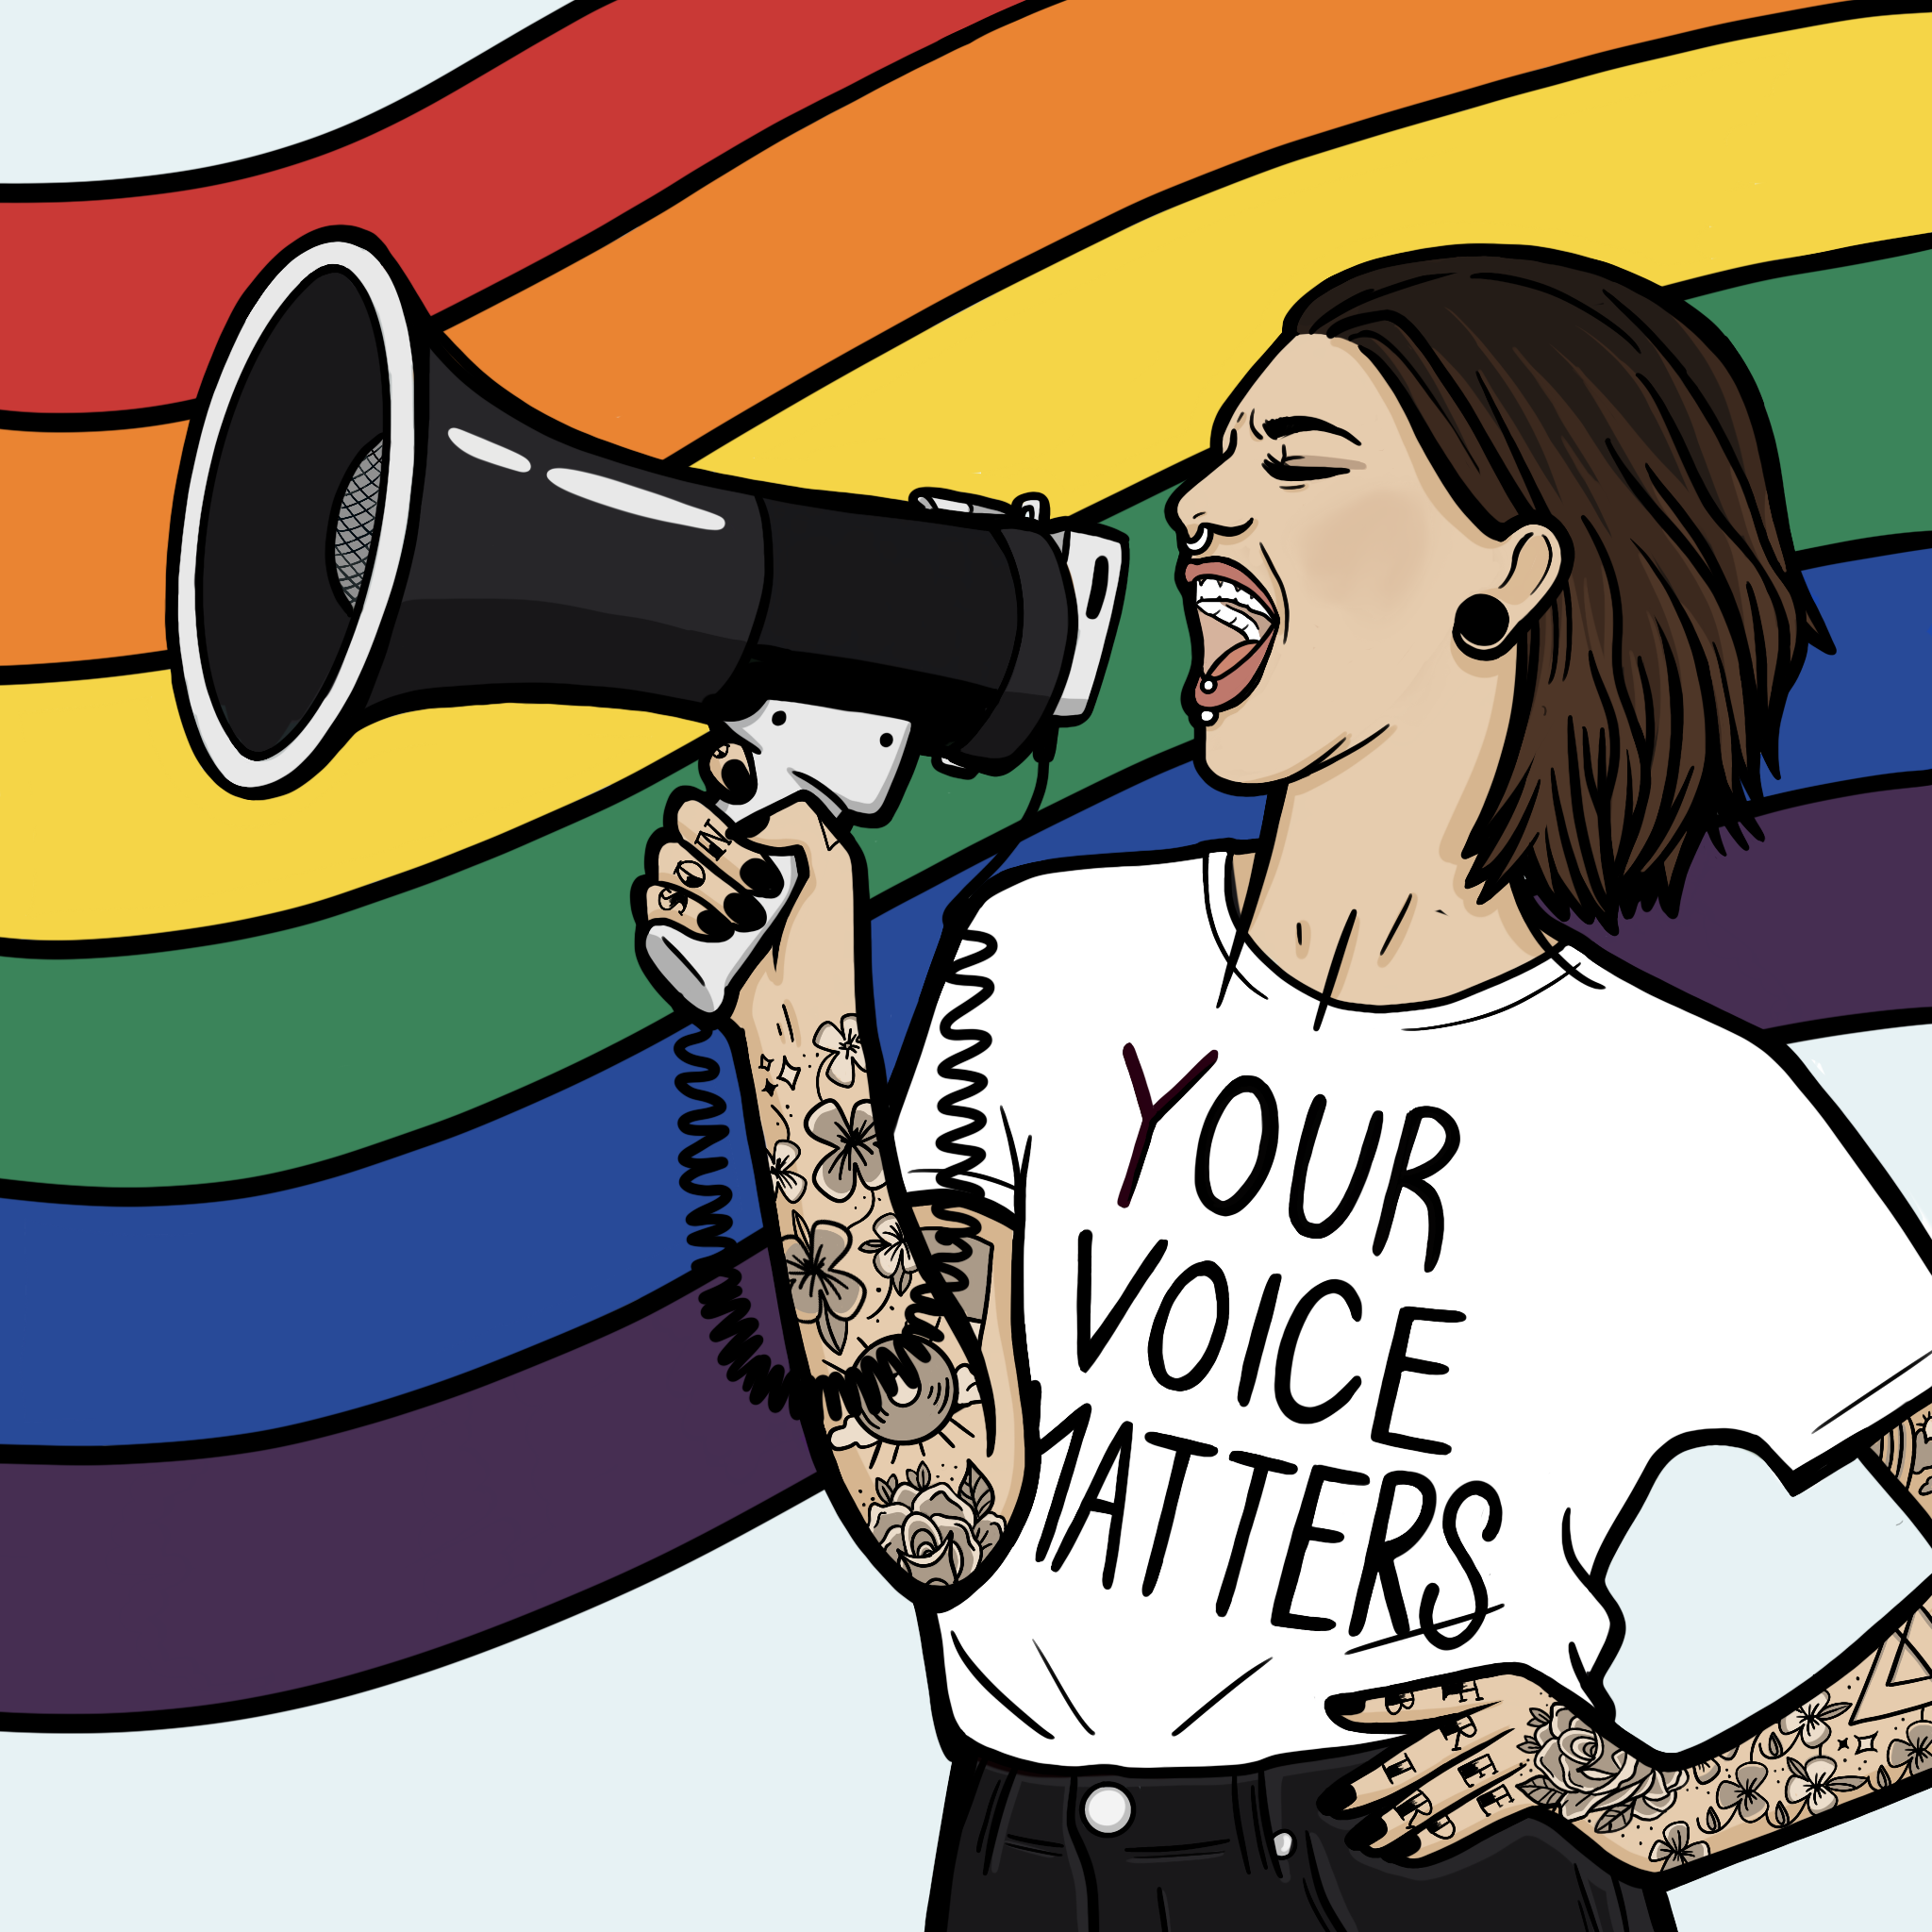 A vibrant illustration depicting a rainbow-colored megaphone against a white background, symbolizing diversity, inclusion, and support for the LGBTQ+ community.